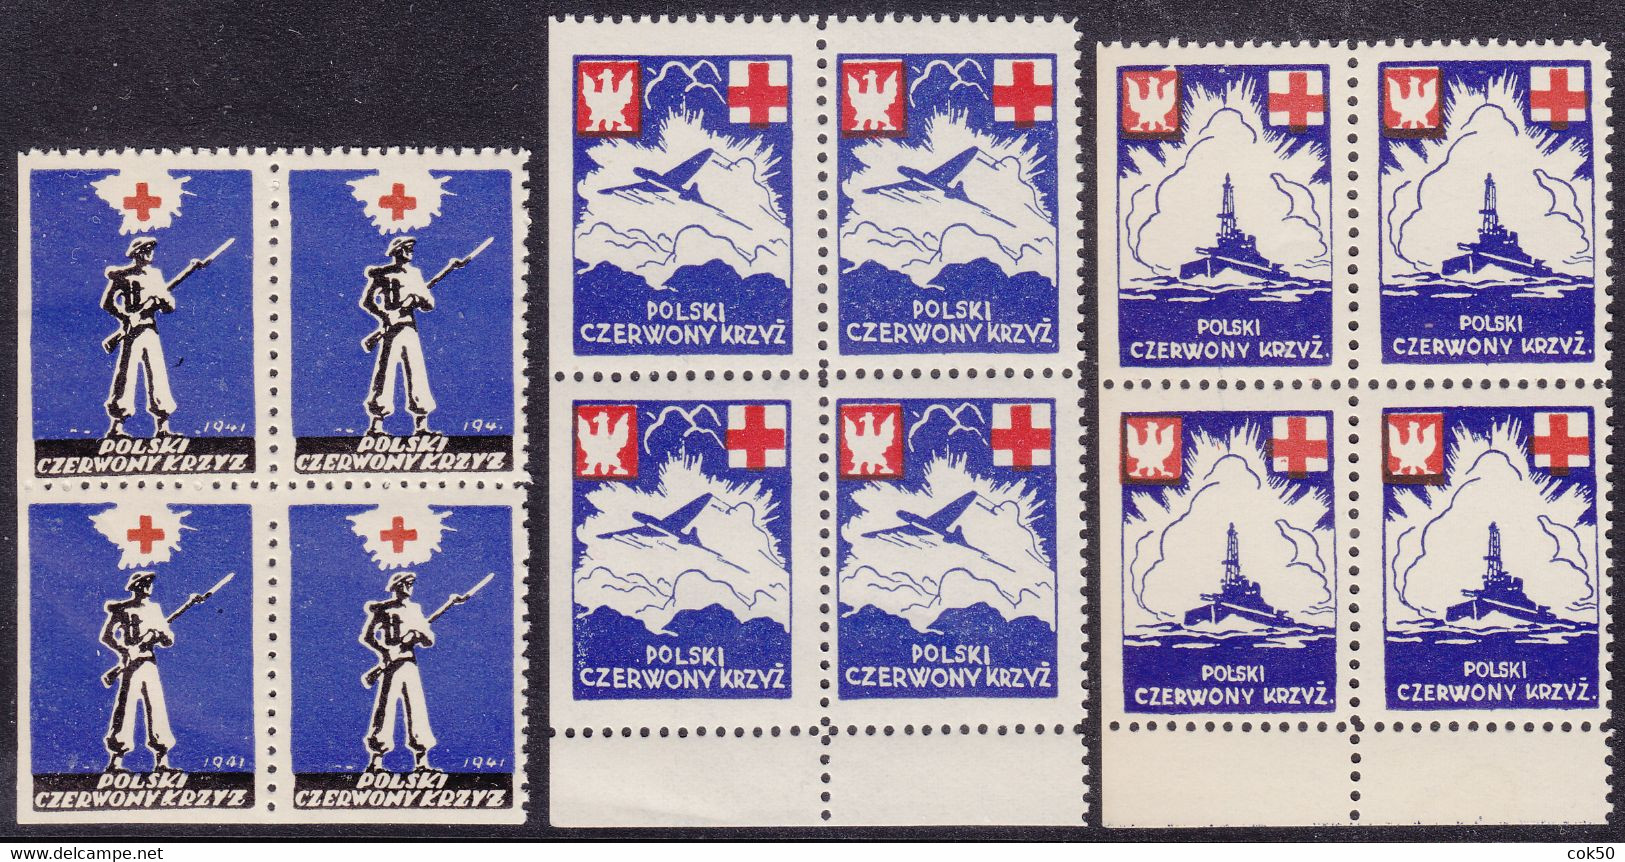 POLAND 1941 - Exile Governm. In London/Red Cross, MNH Lower LEFT Corner Bl.of 4, Two Stamps Perf. 3 Sides - Study Scan ! - Government In Exile In London